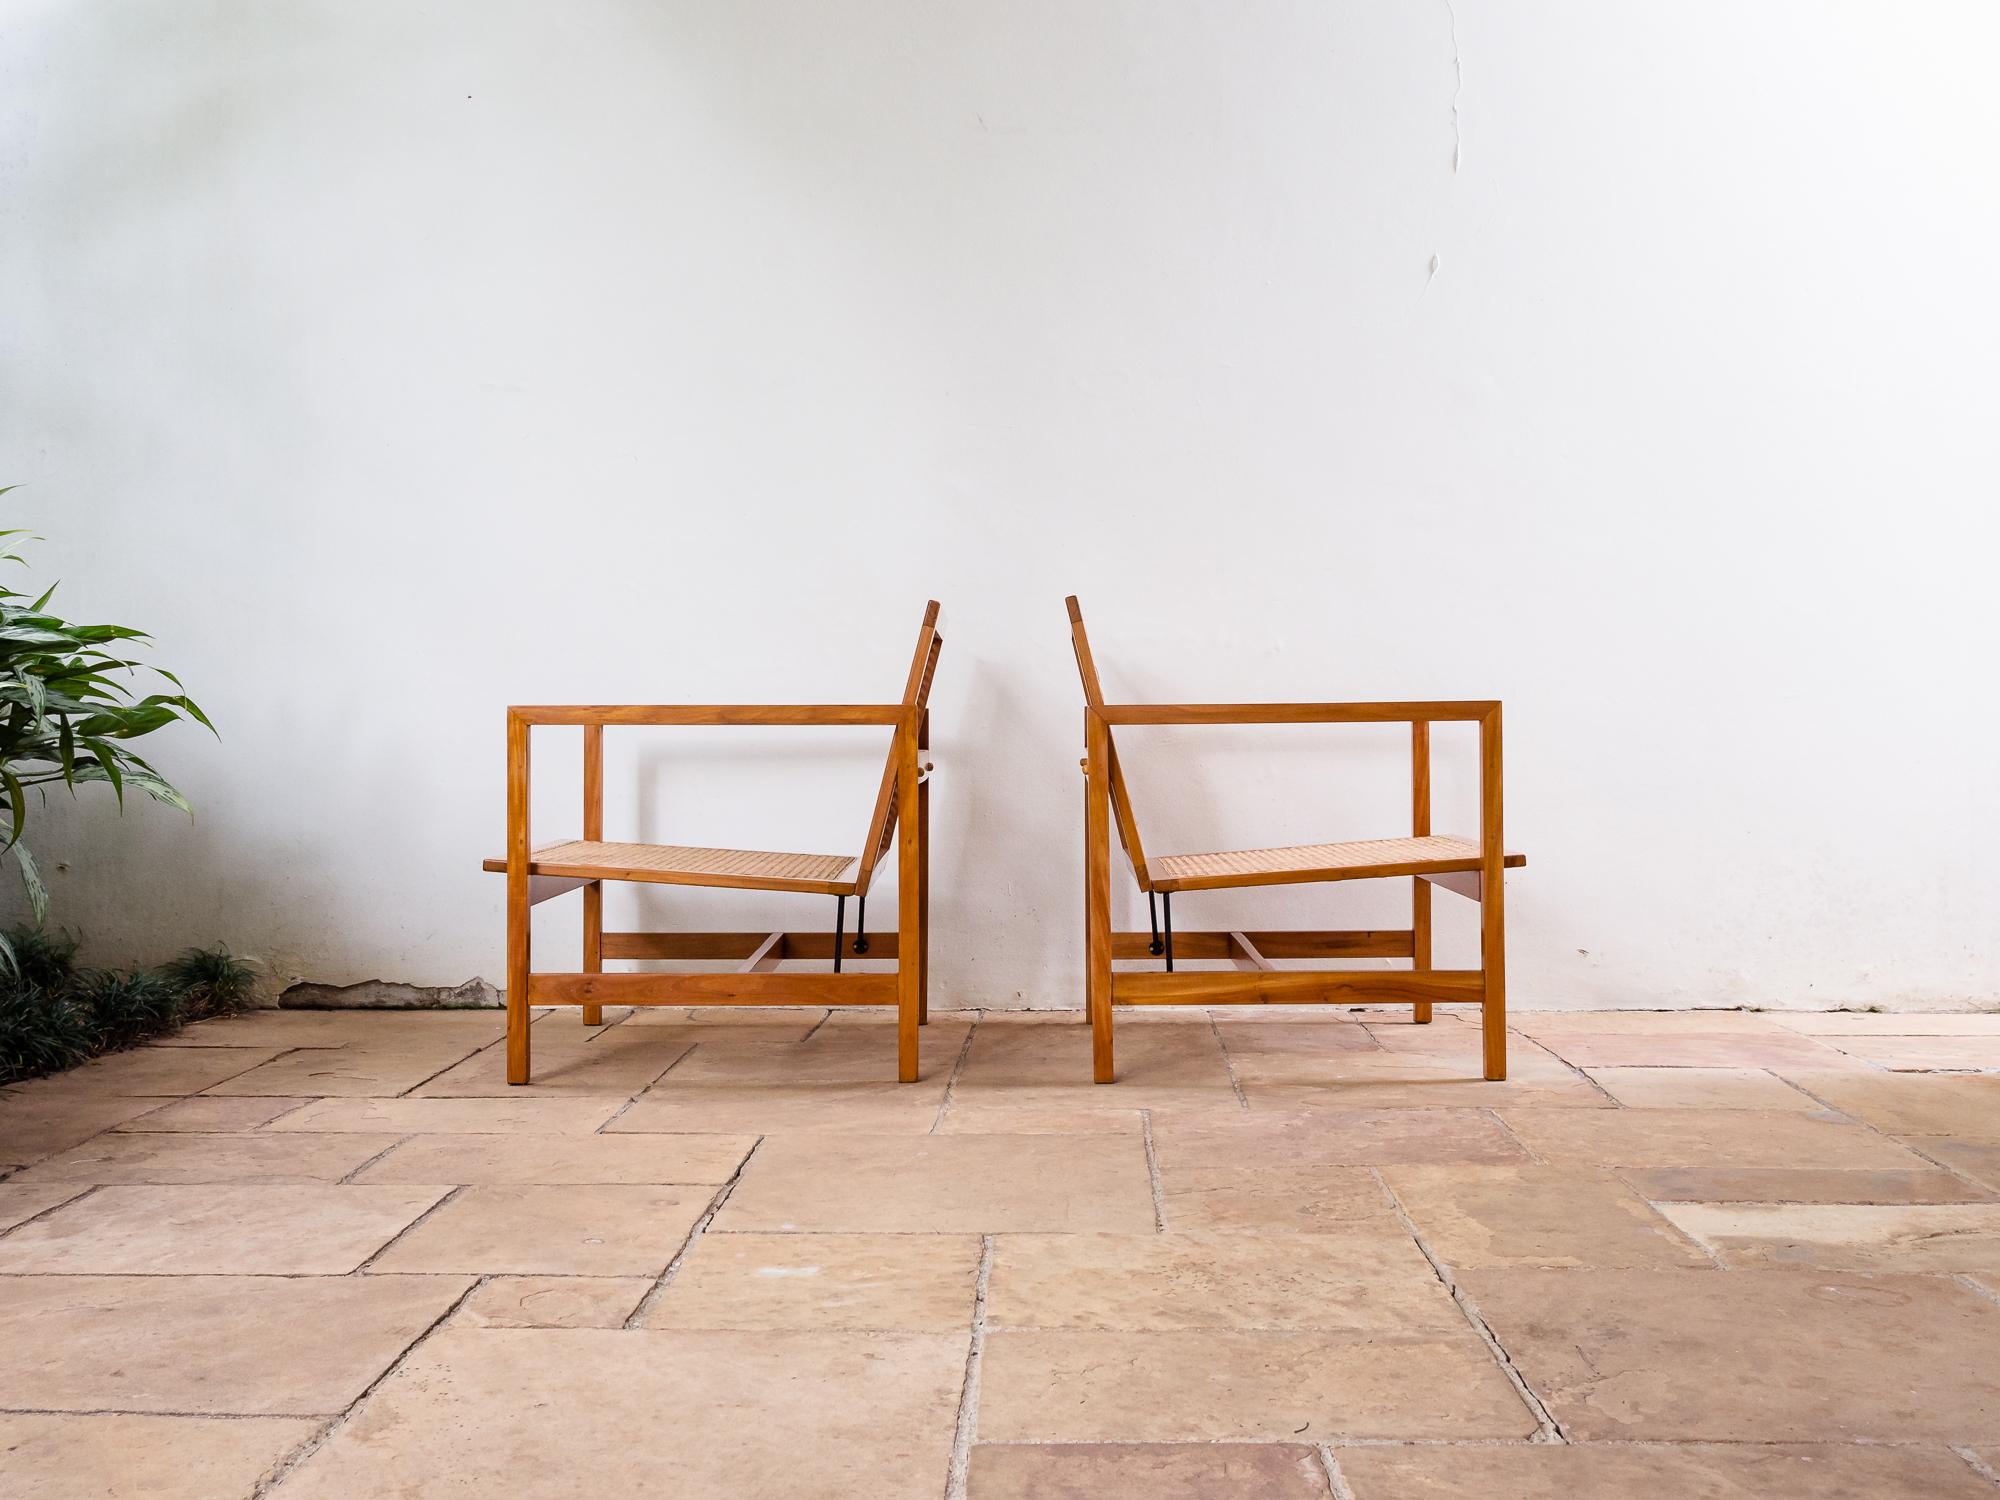 Brazilian Mid-Century Modern chairs from circa 1968, unknown author.
This beautiful pair of lounge chairs is produced in 'Peroba do Campo' hardwood, and feature Italian natural cane seats and backrests. The overall square shape is contrasted by the